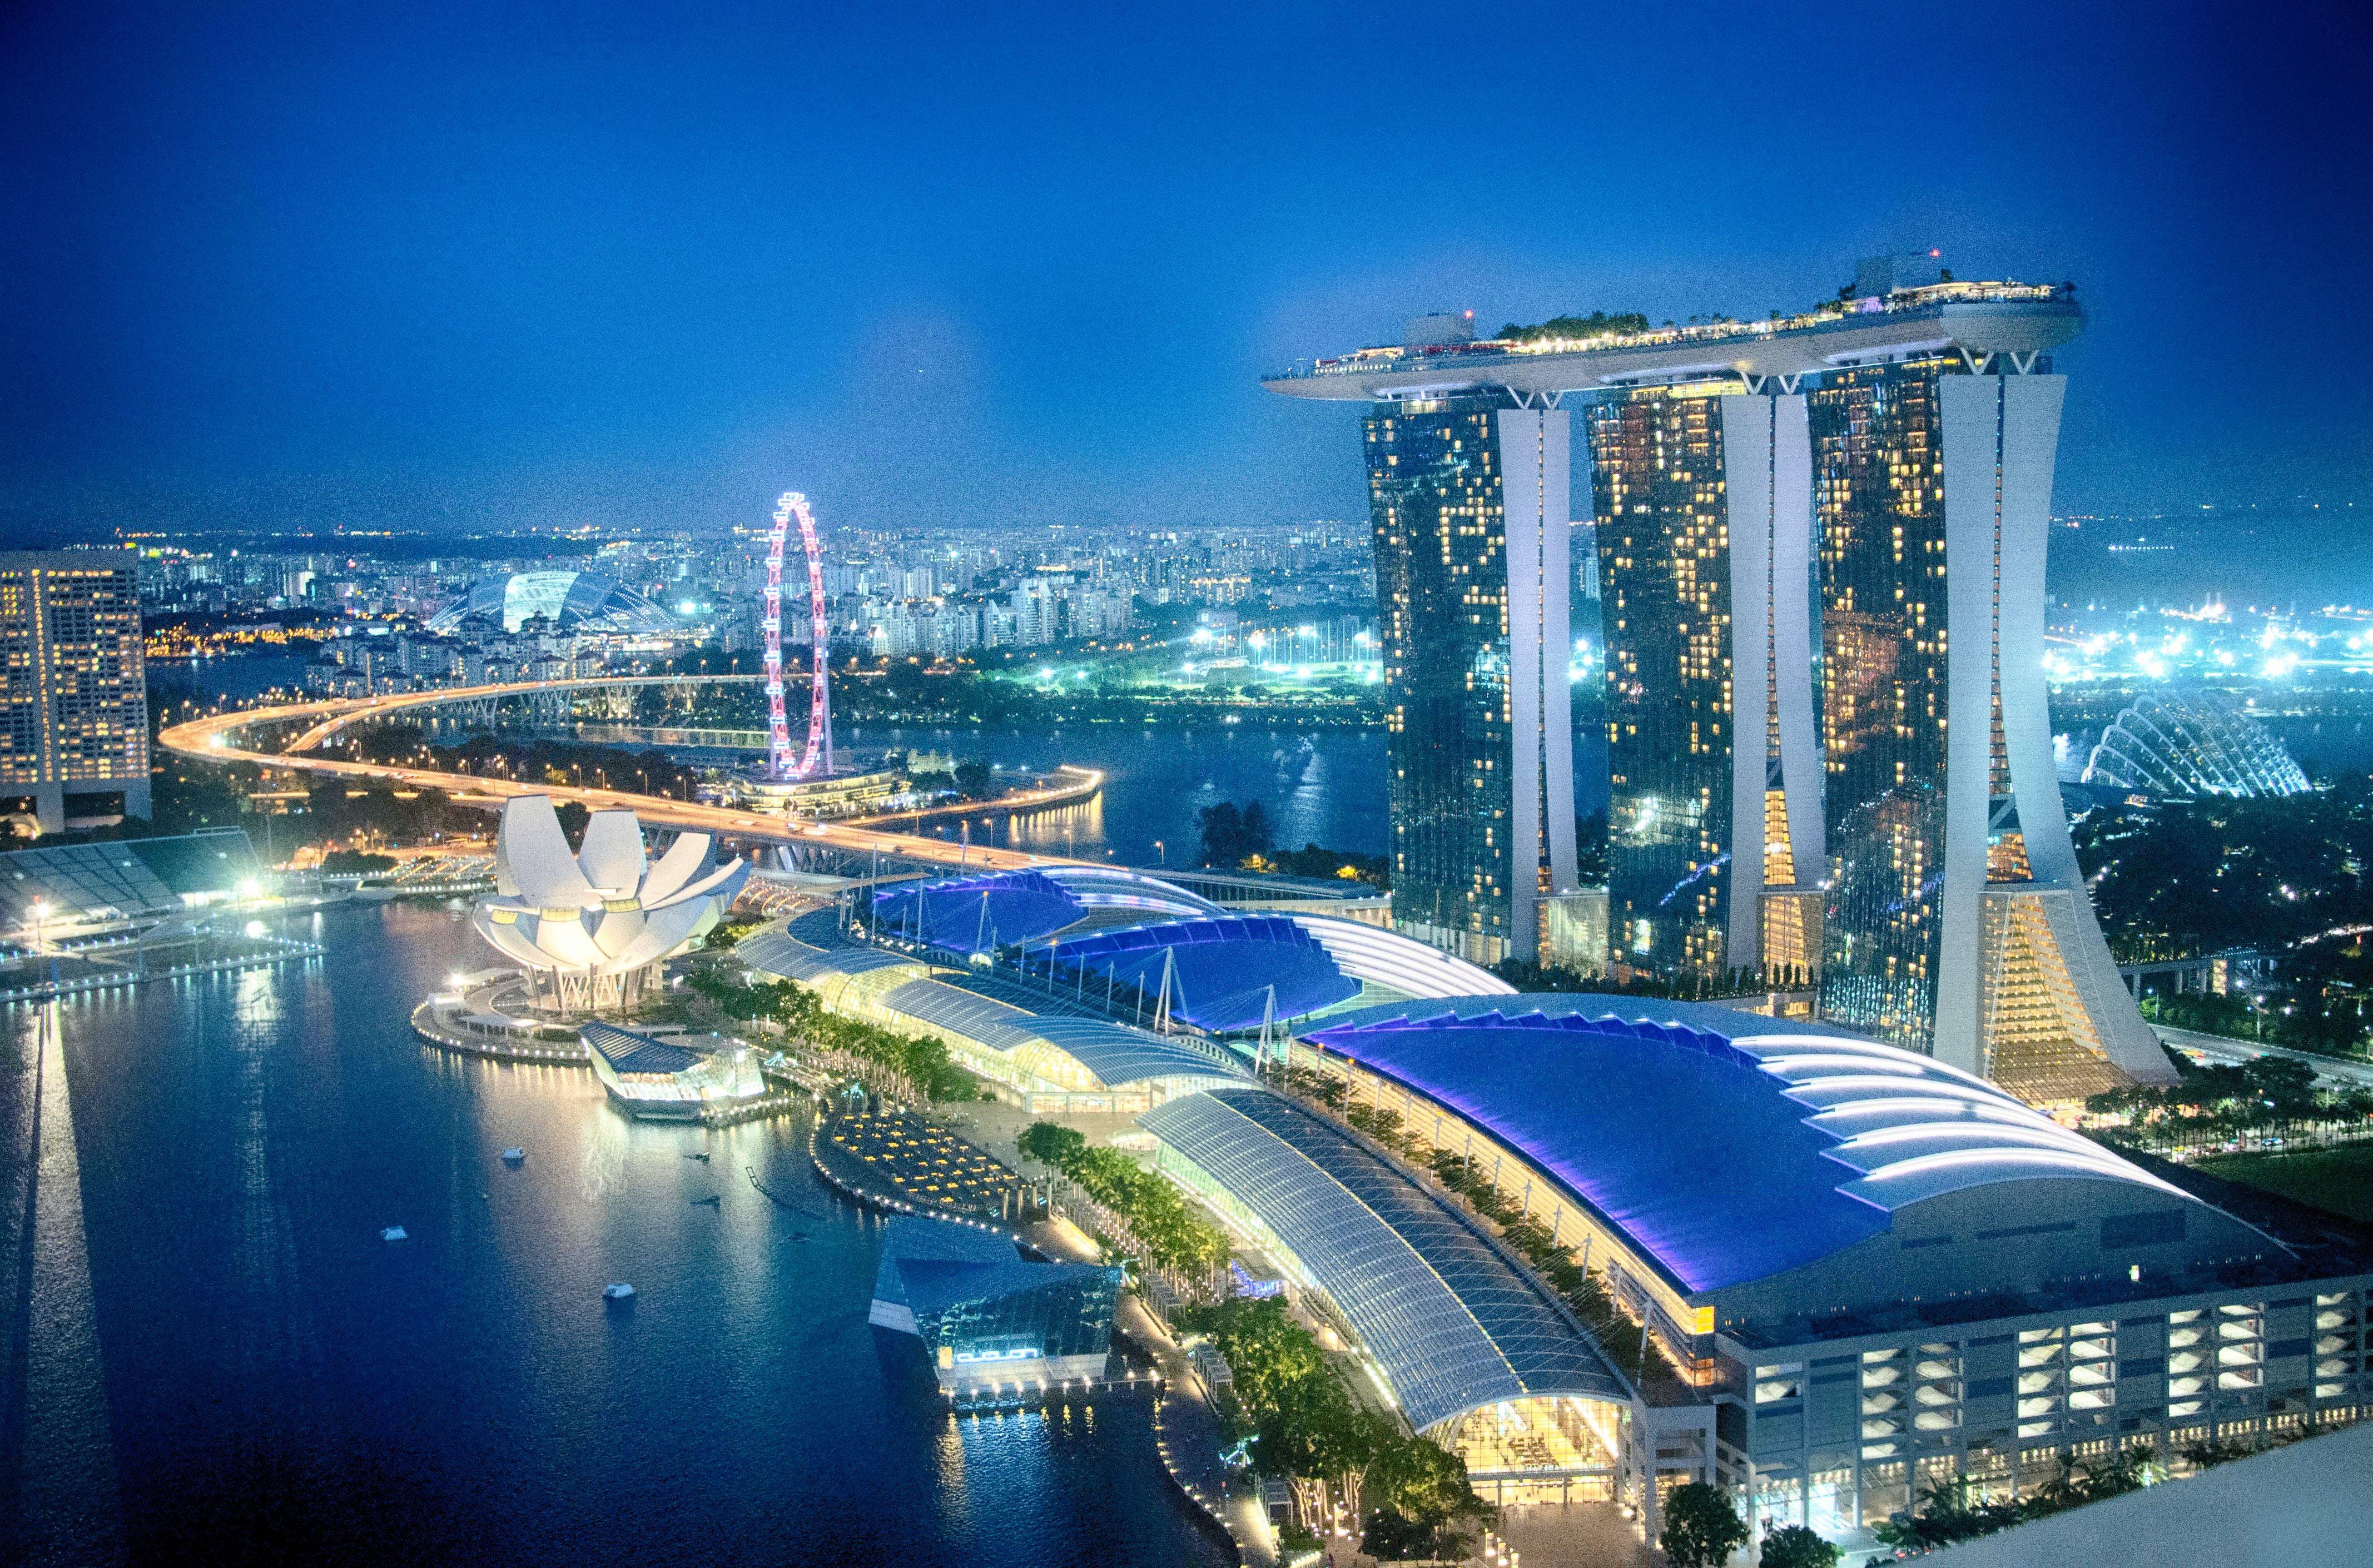 Photo of Marina Bay Sands, Singapore during nighttime in panoramic